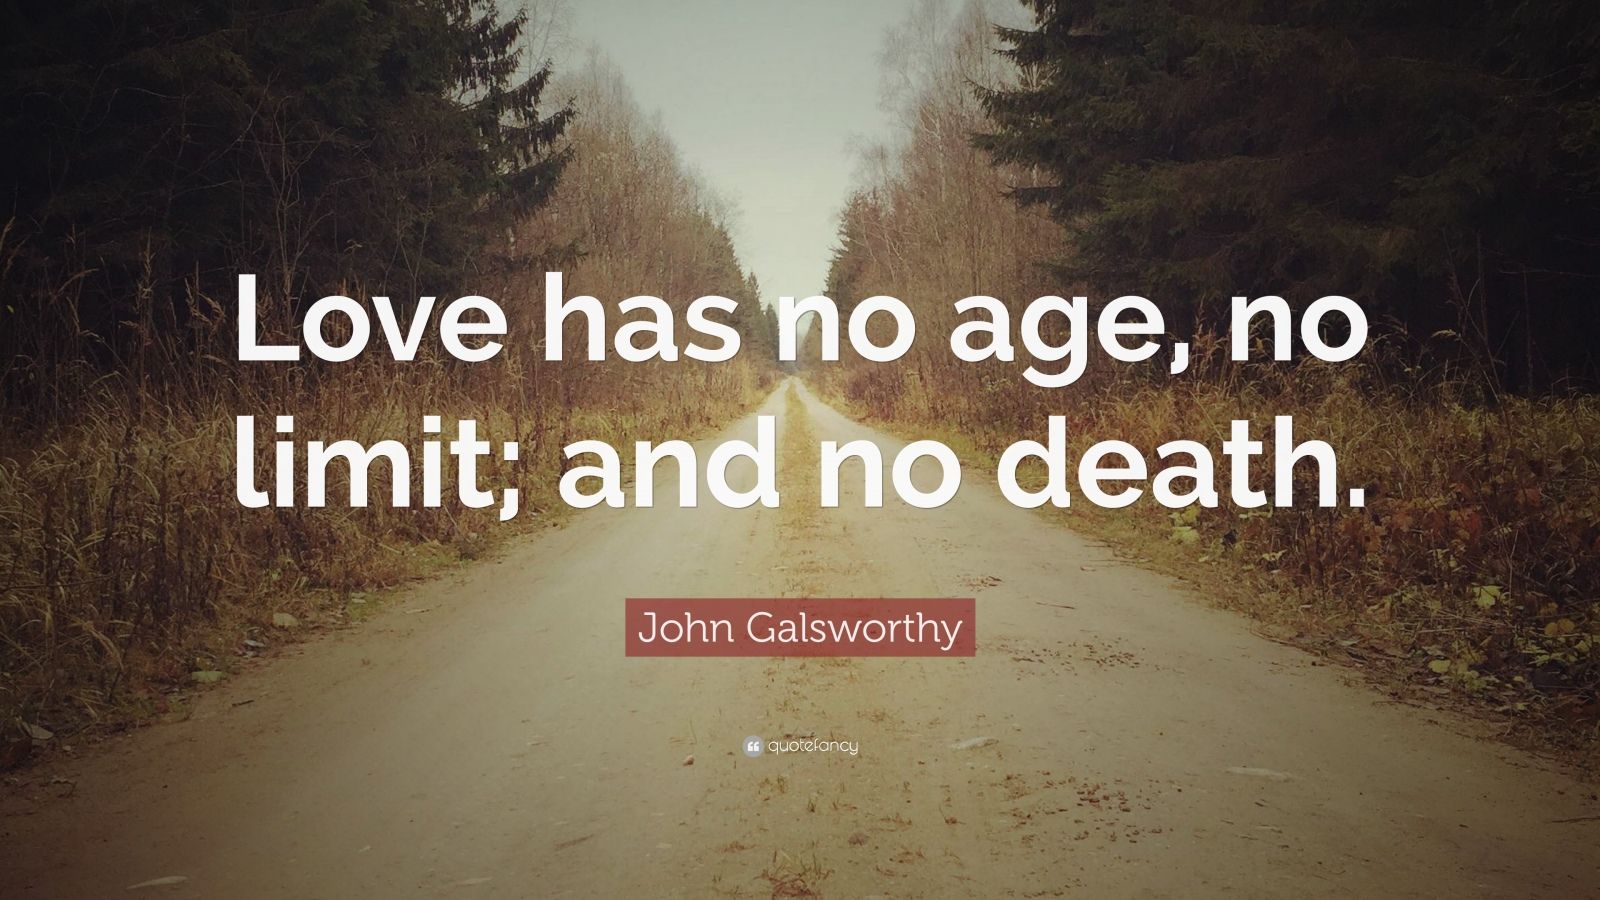 John Galsworthy Quote: "Love has no age, no limit; and no death." (10 wallpapers) - Quotefancy